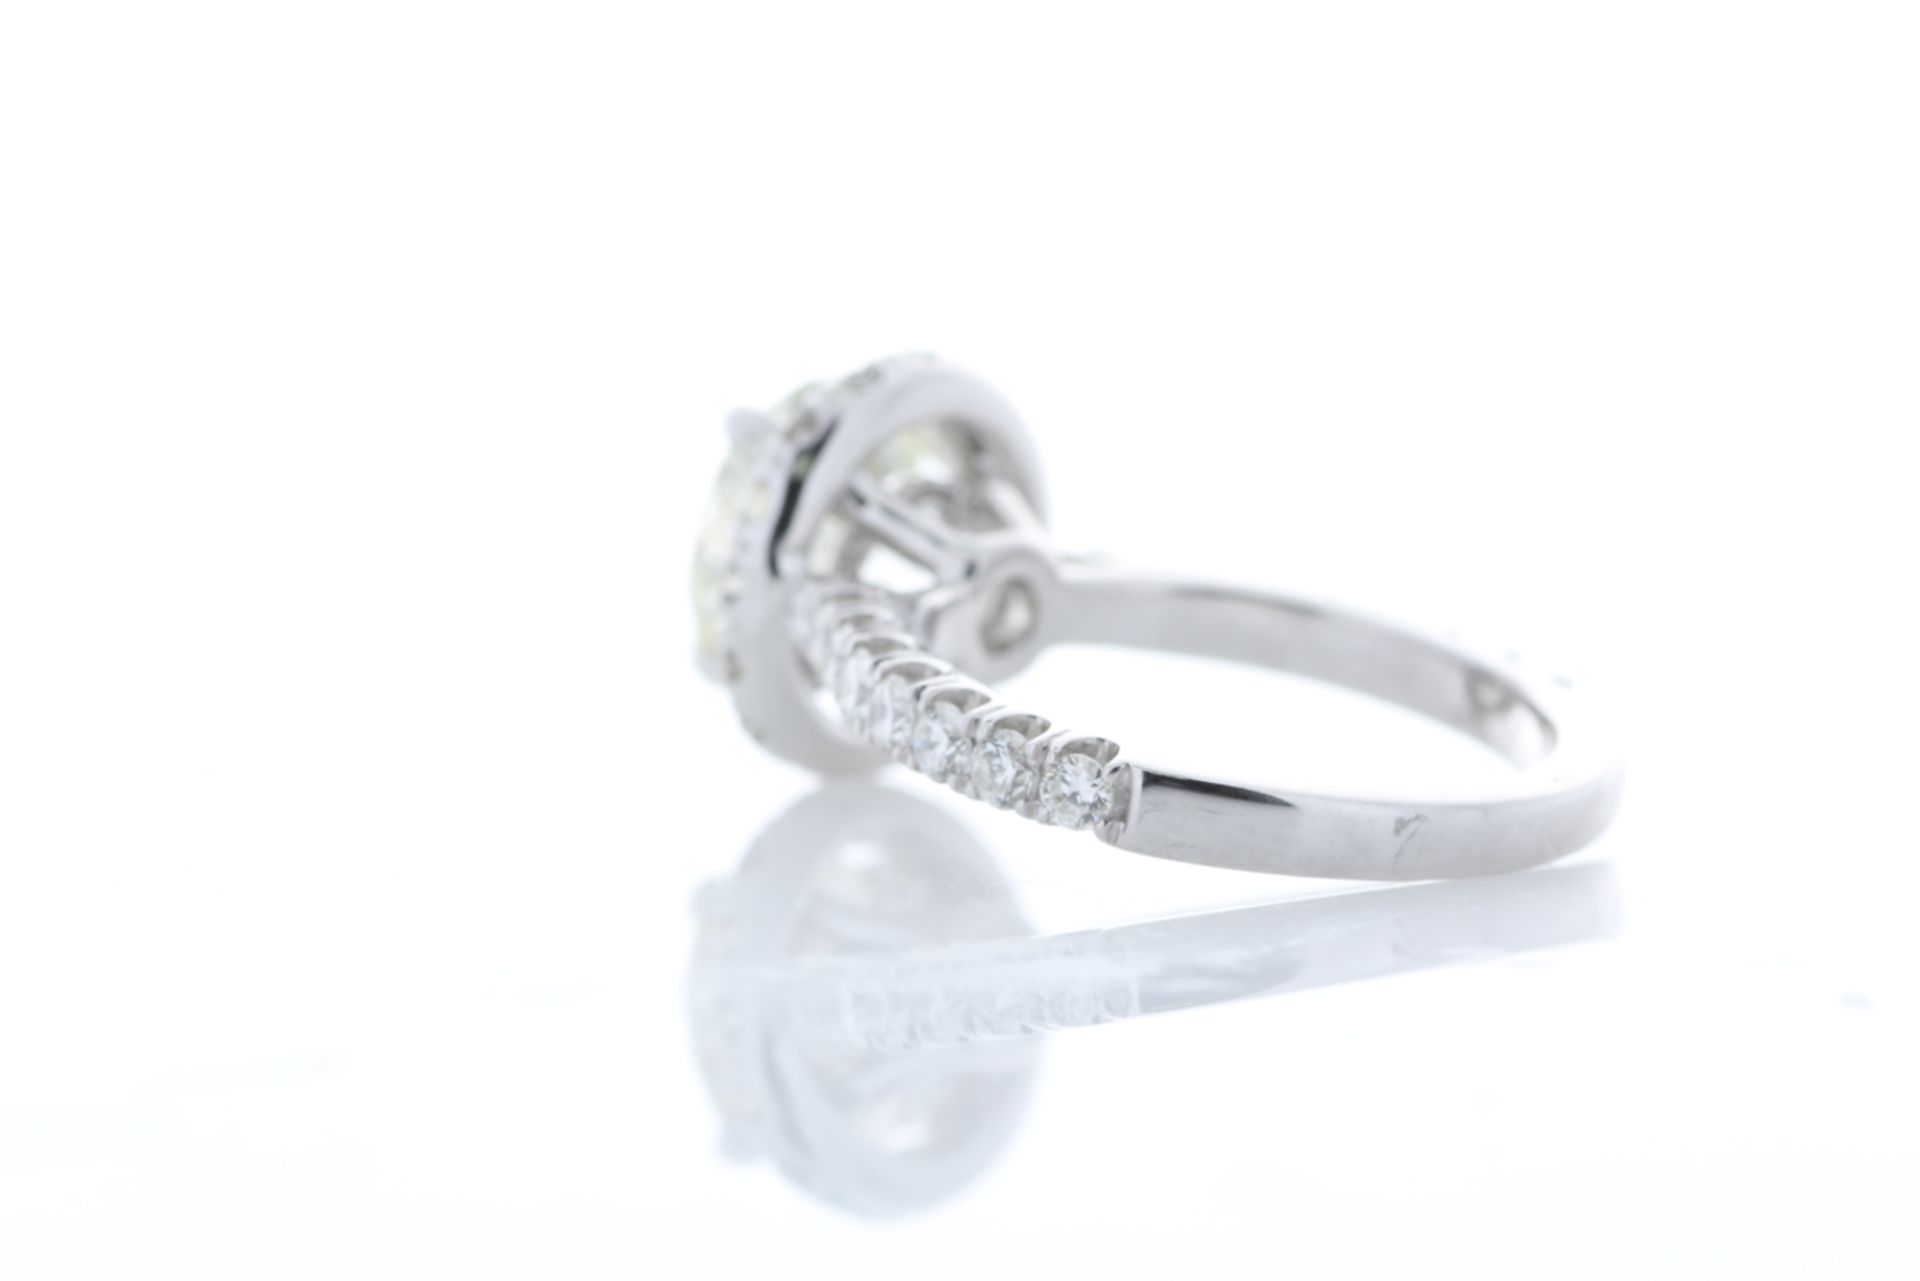 18ct White Gold Single Stone With Halo Setting Ring 2.85 Centre Stone - Image 3 of 9